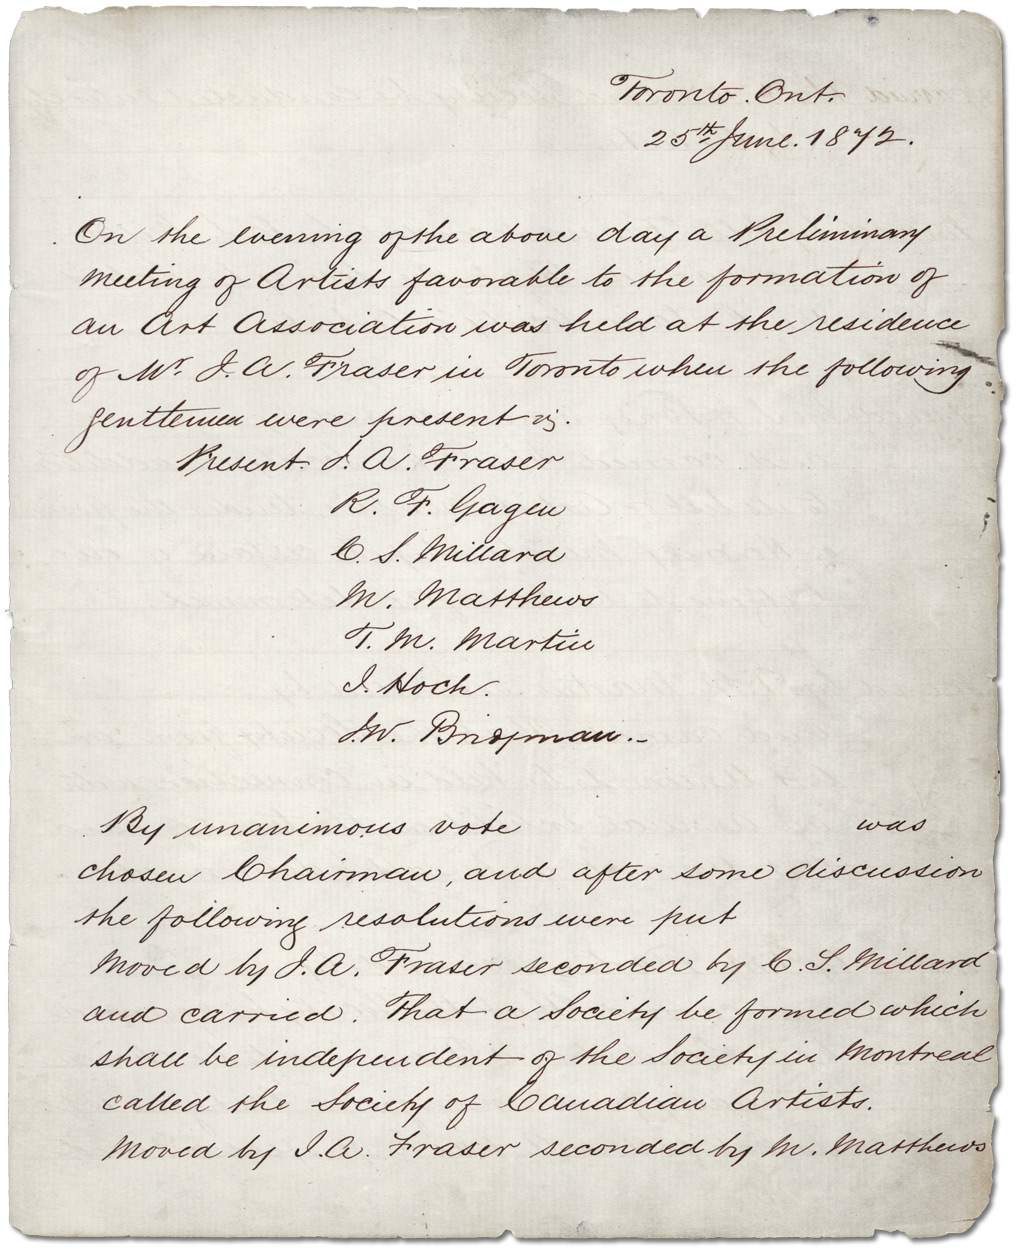 First Page of OSA Minute Book with entry for the inaugural meeting on June 25th, 1872.